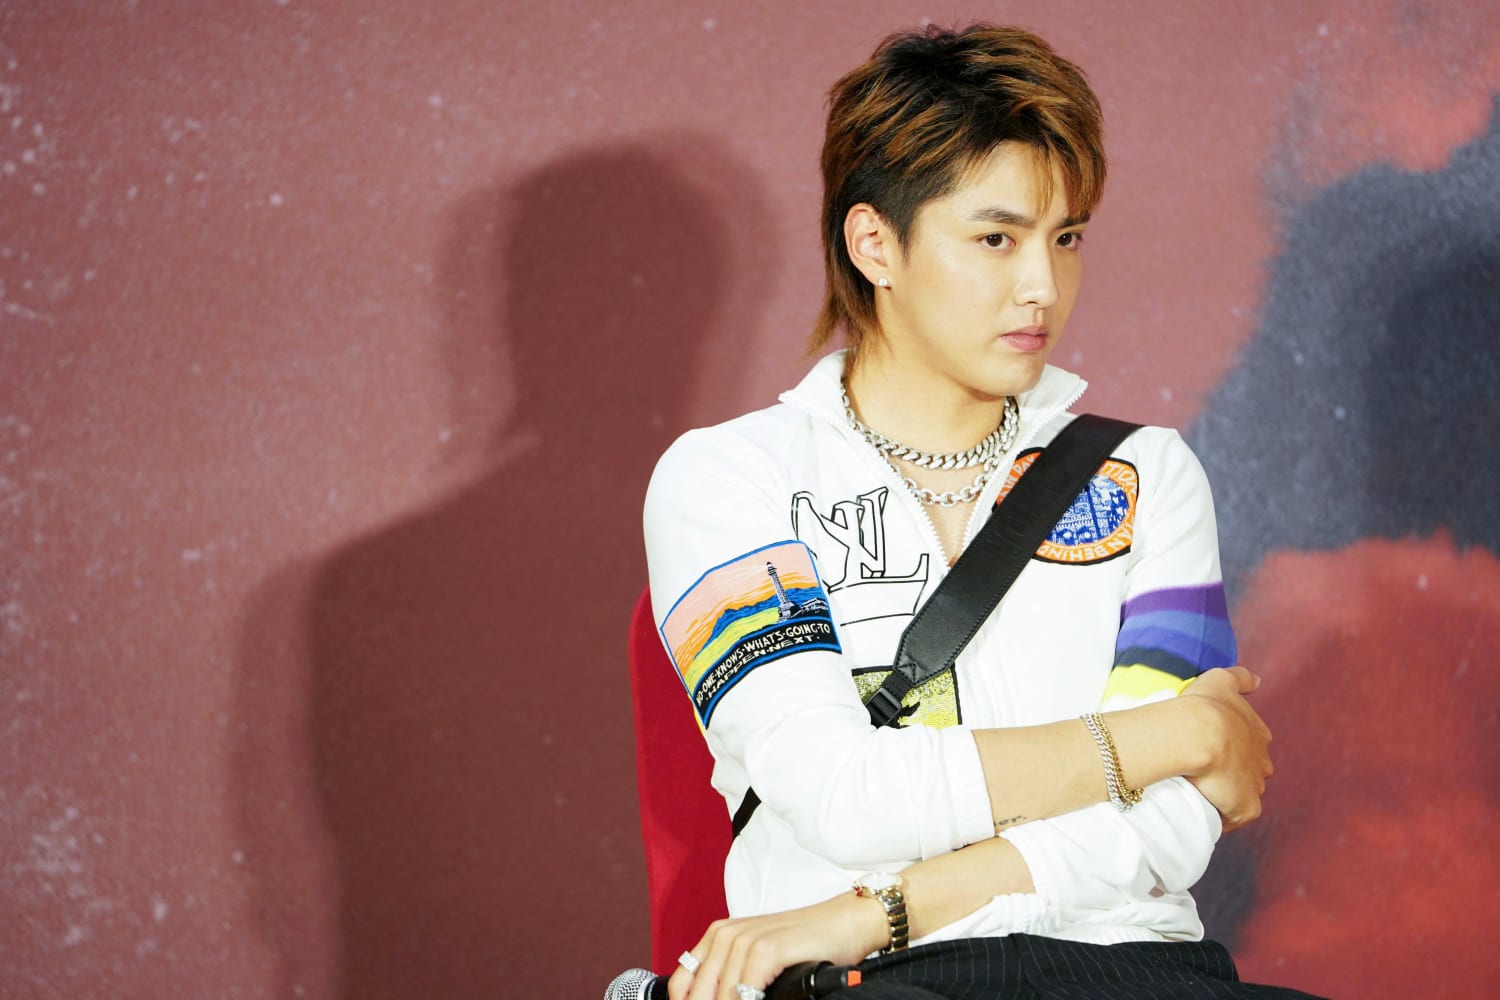 Chaina Rap Xxx Video - Pop star Kris Wu sentenced to 13 years in jail for rape in China